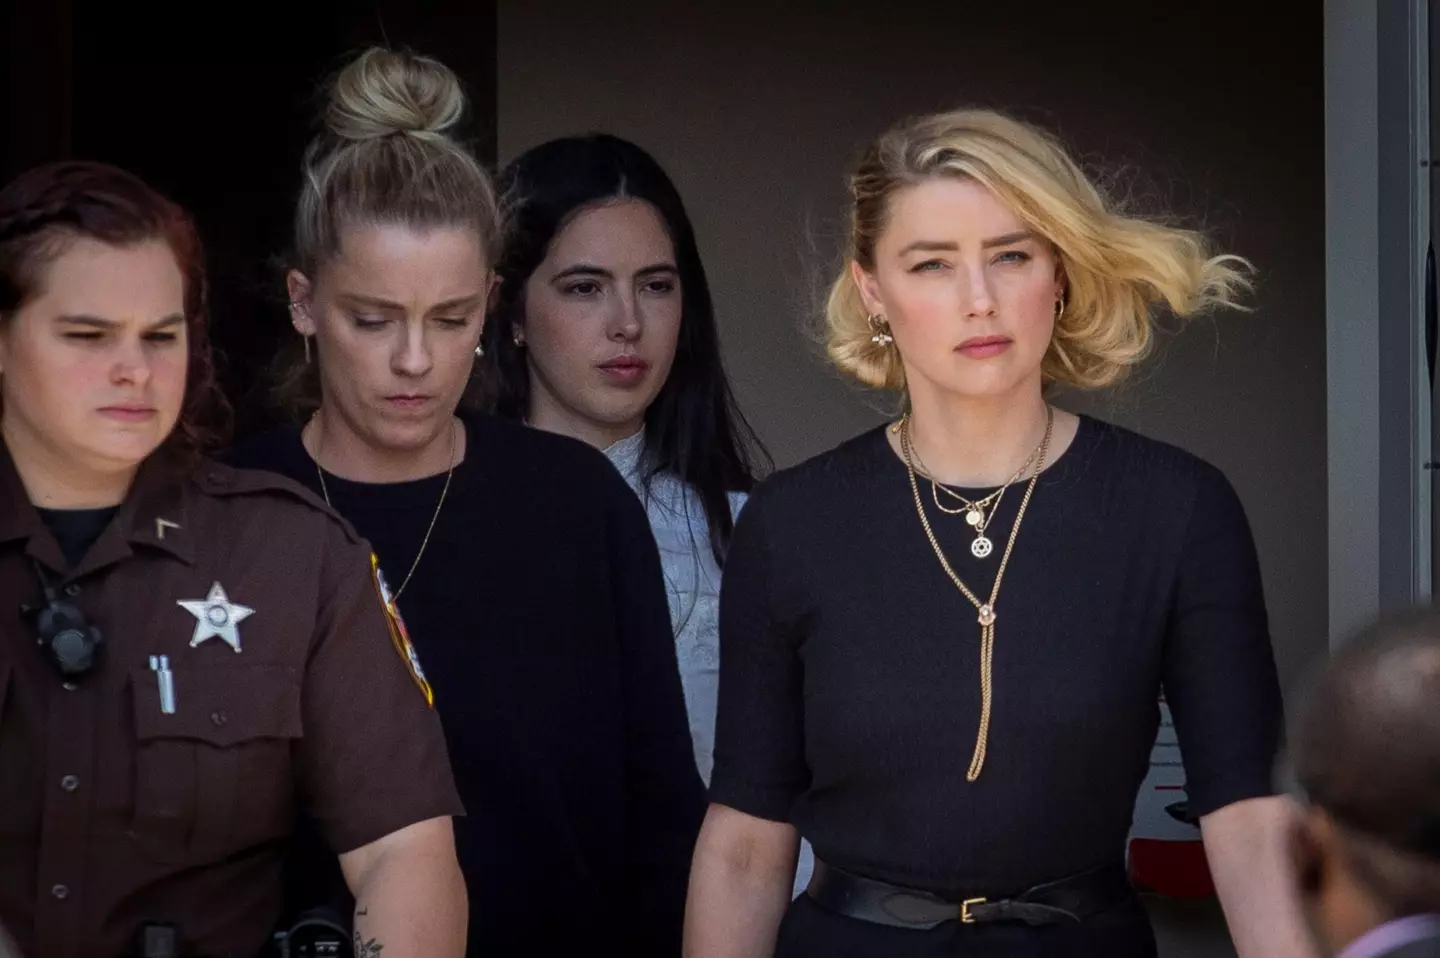 Amber Heard departs the courthouse following the verdicts in her trial against Johnny Depp.